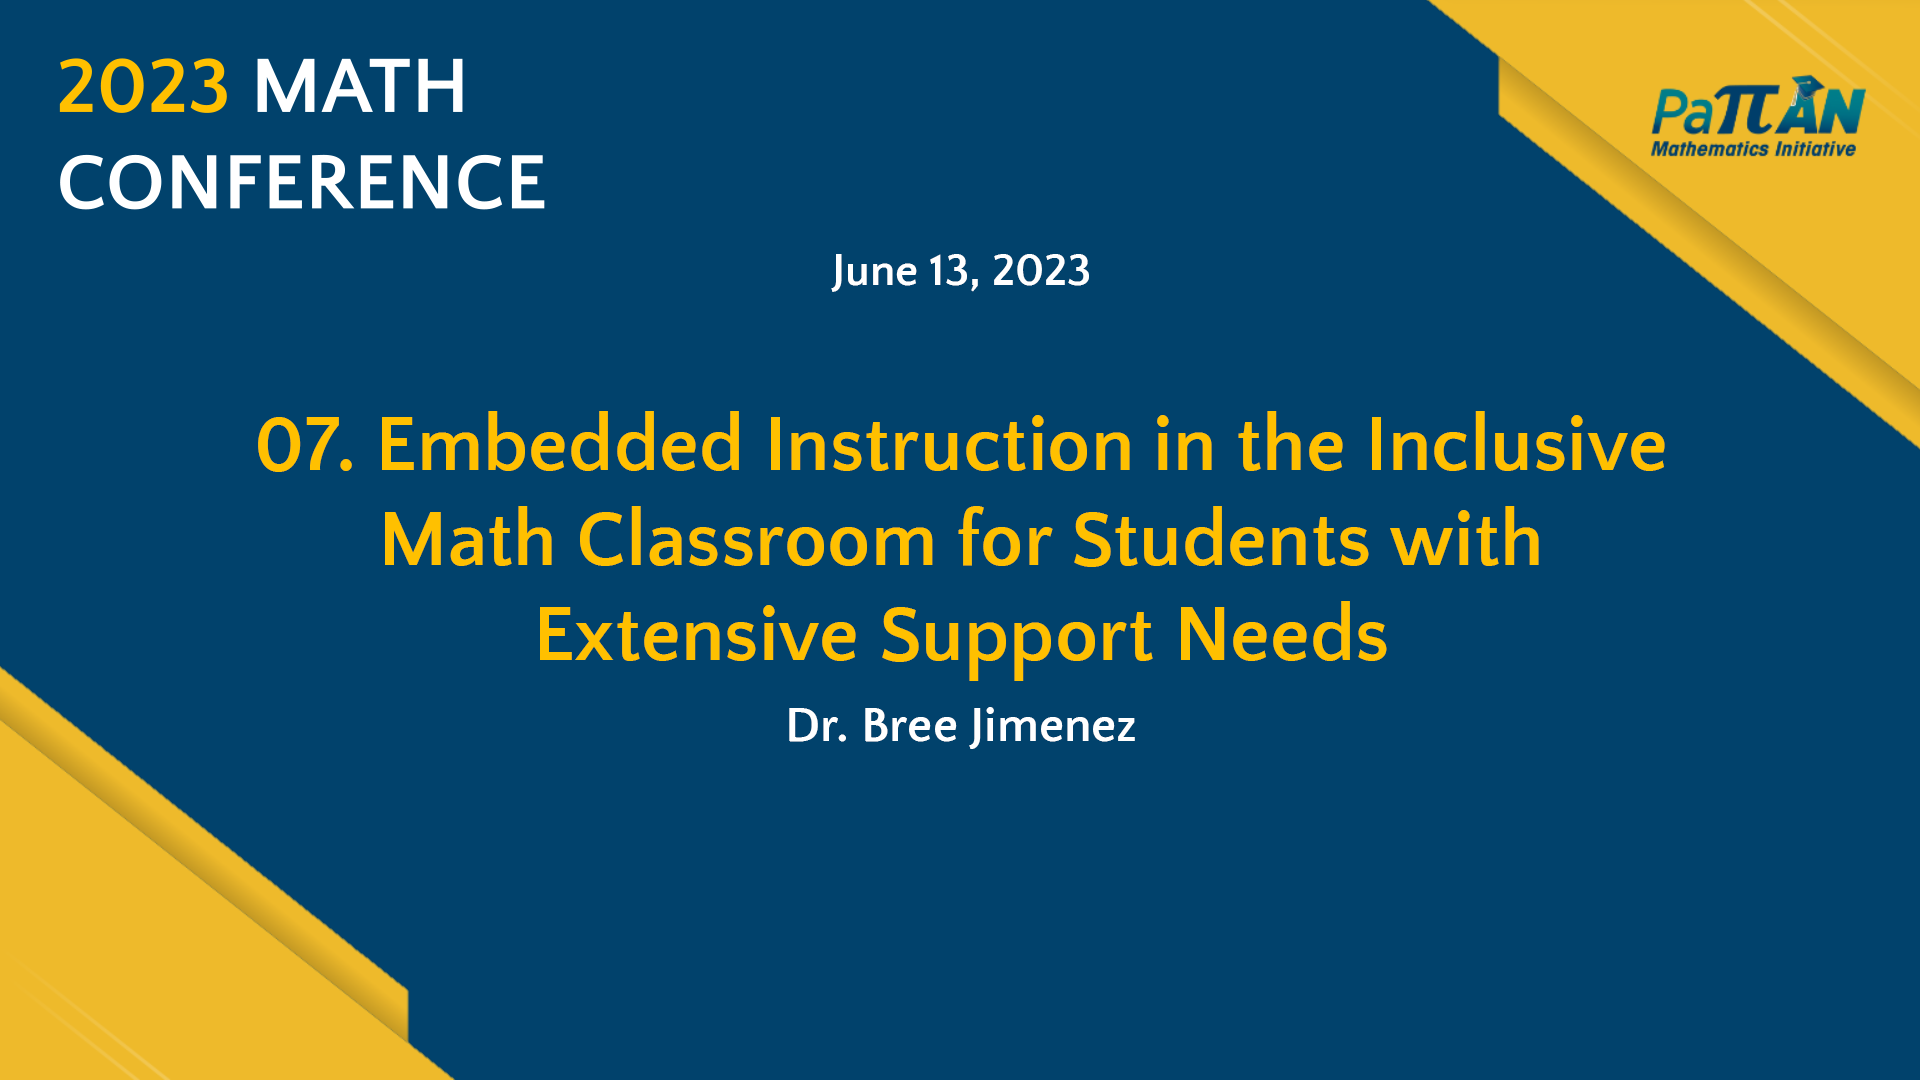 07. Embedded Instruction in the Inclusive Math Classroom for Students ... | Math Conference 2023